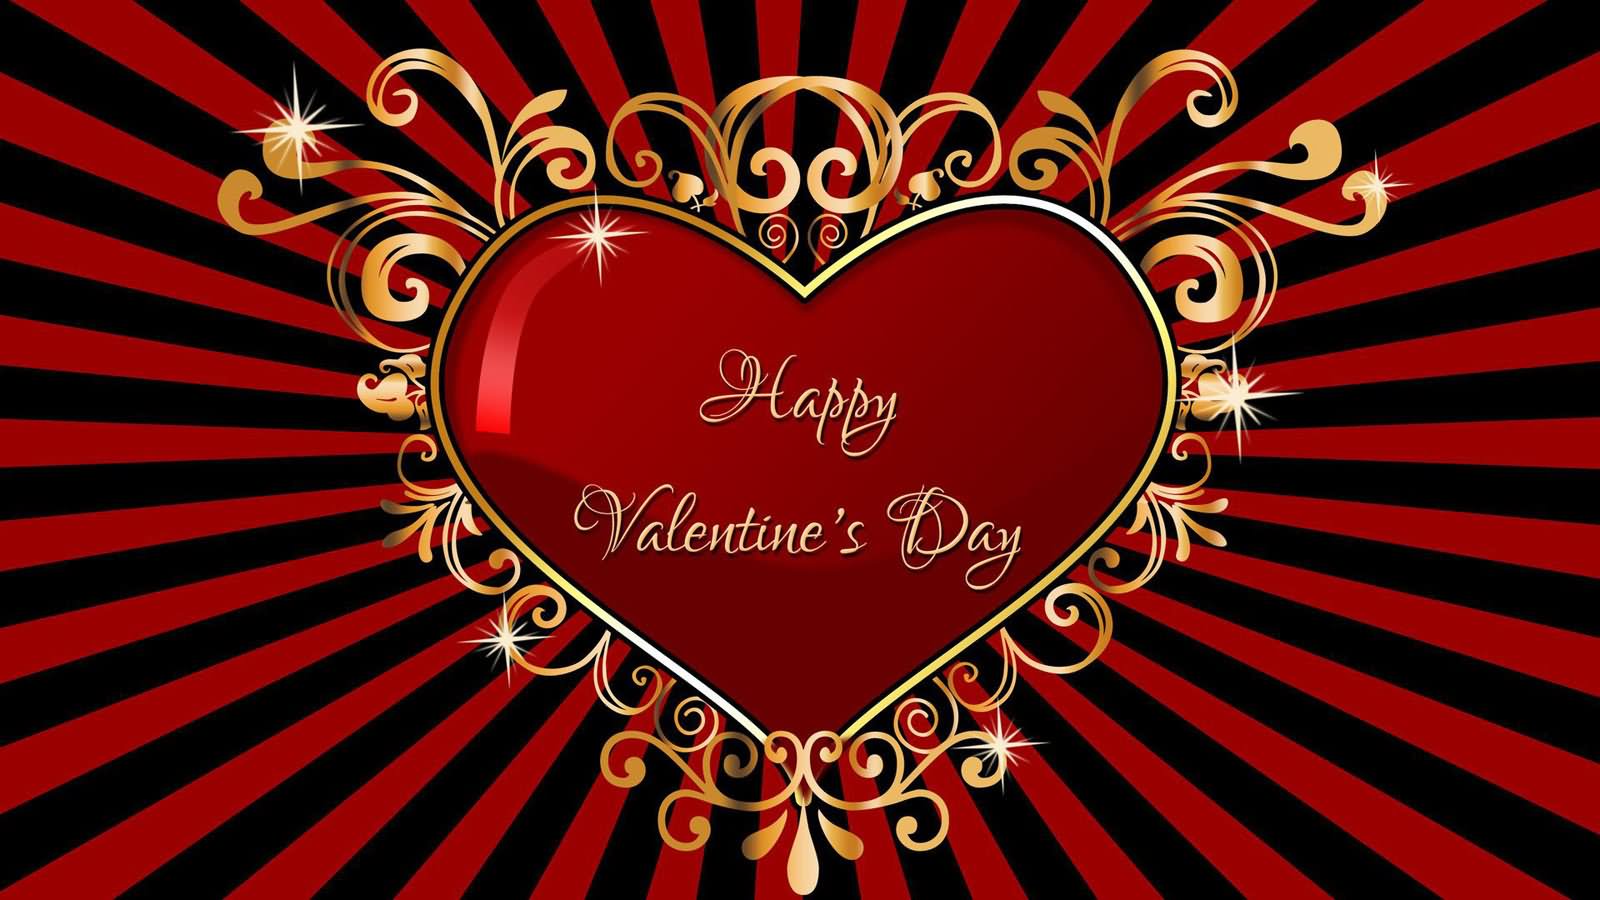 25 Wonderful Valentines Day Wishes Pictures